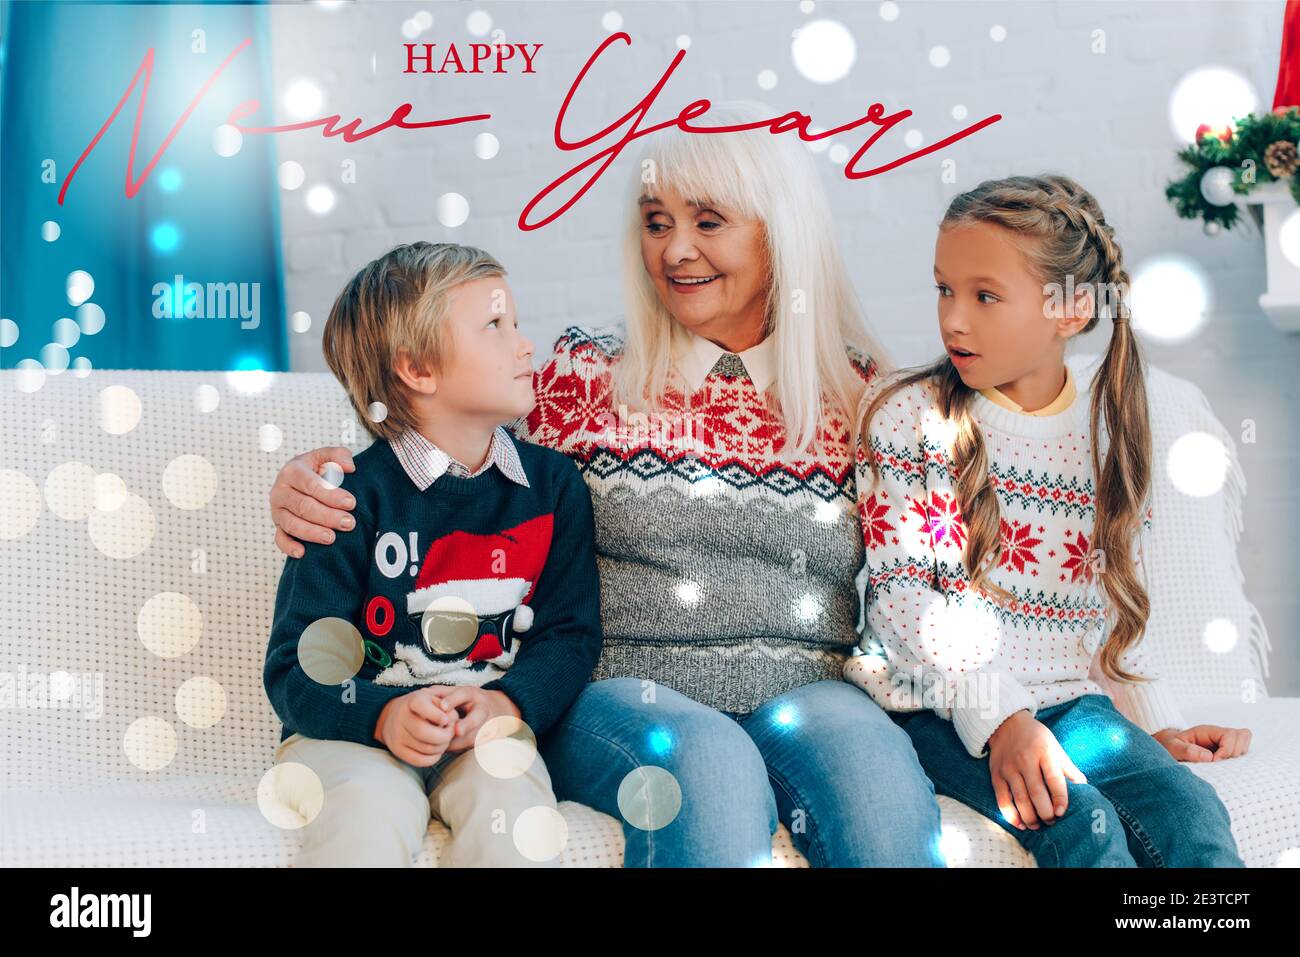 smiling senior woman talking to grandchildren while sitting on sofa together, happy new year illustration Stock Photo